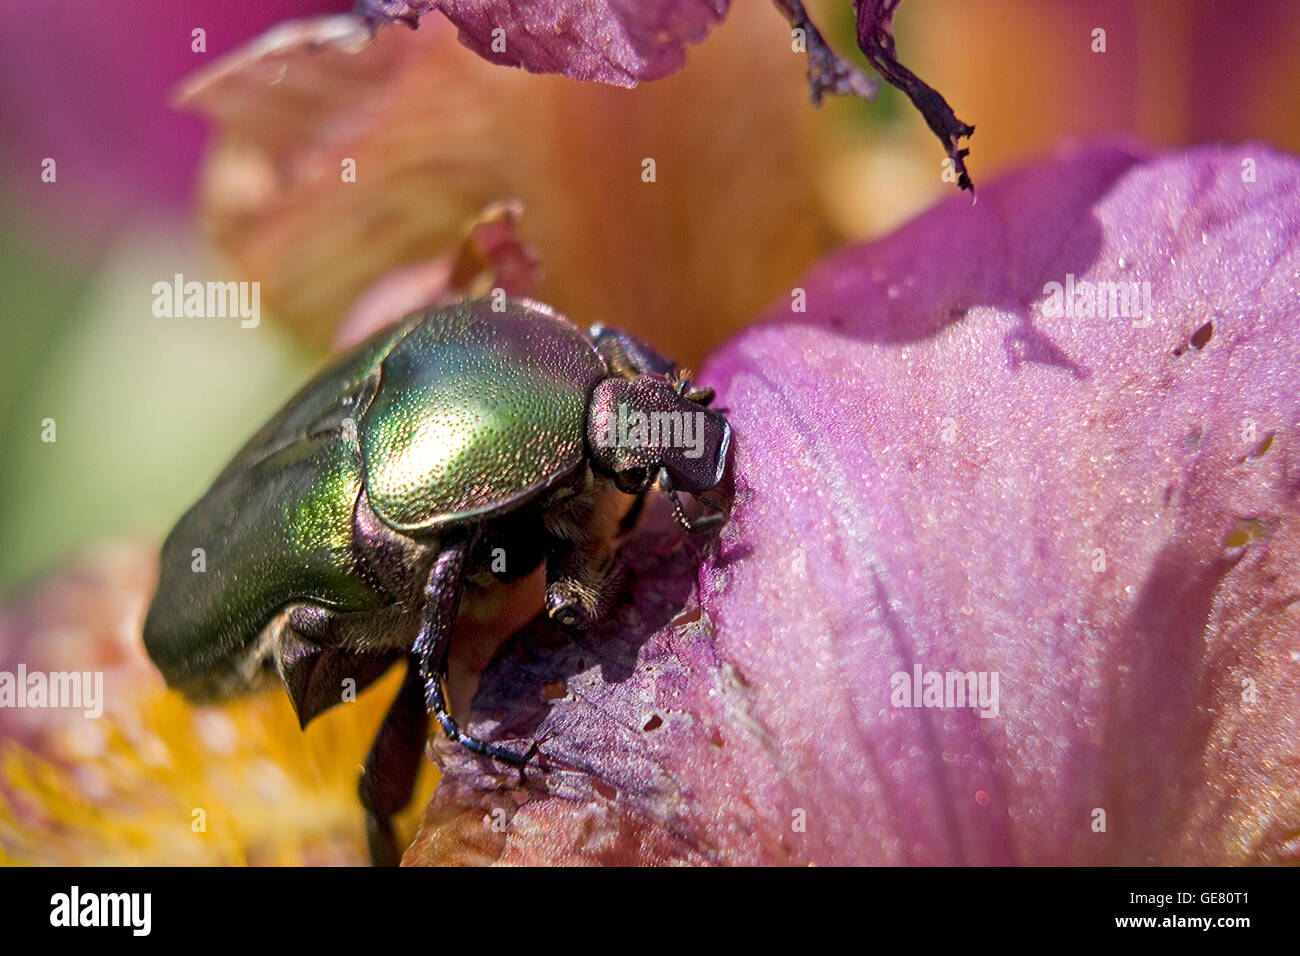 Chrysolina varians beetle on a flower. Big bug shot up close, on a purple flower in the spring time. Colorful and vibrant garden life at its finest. Stock Photo